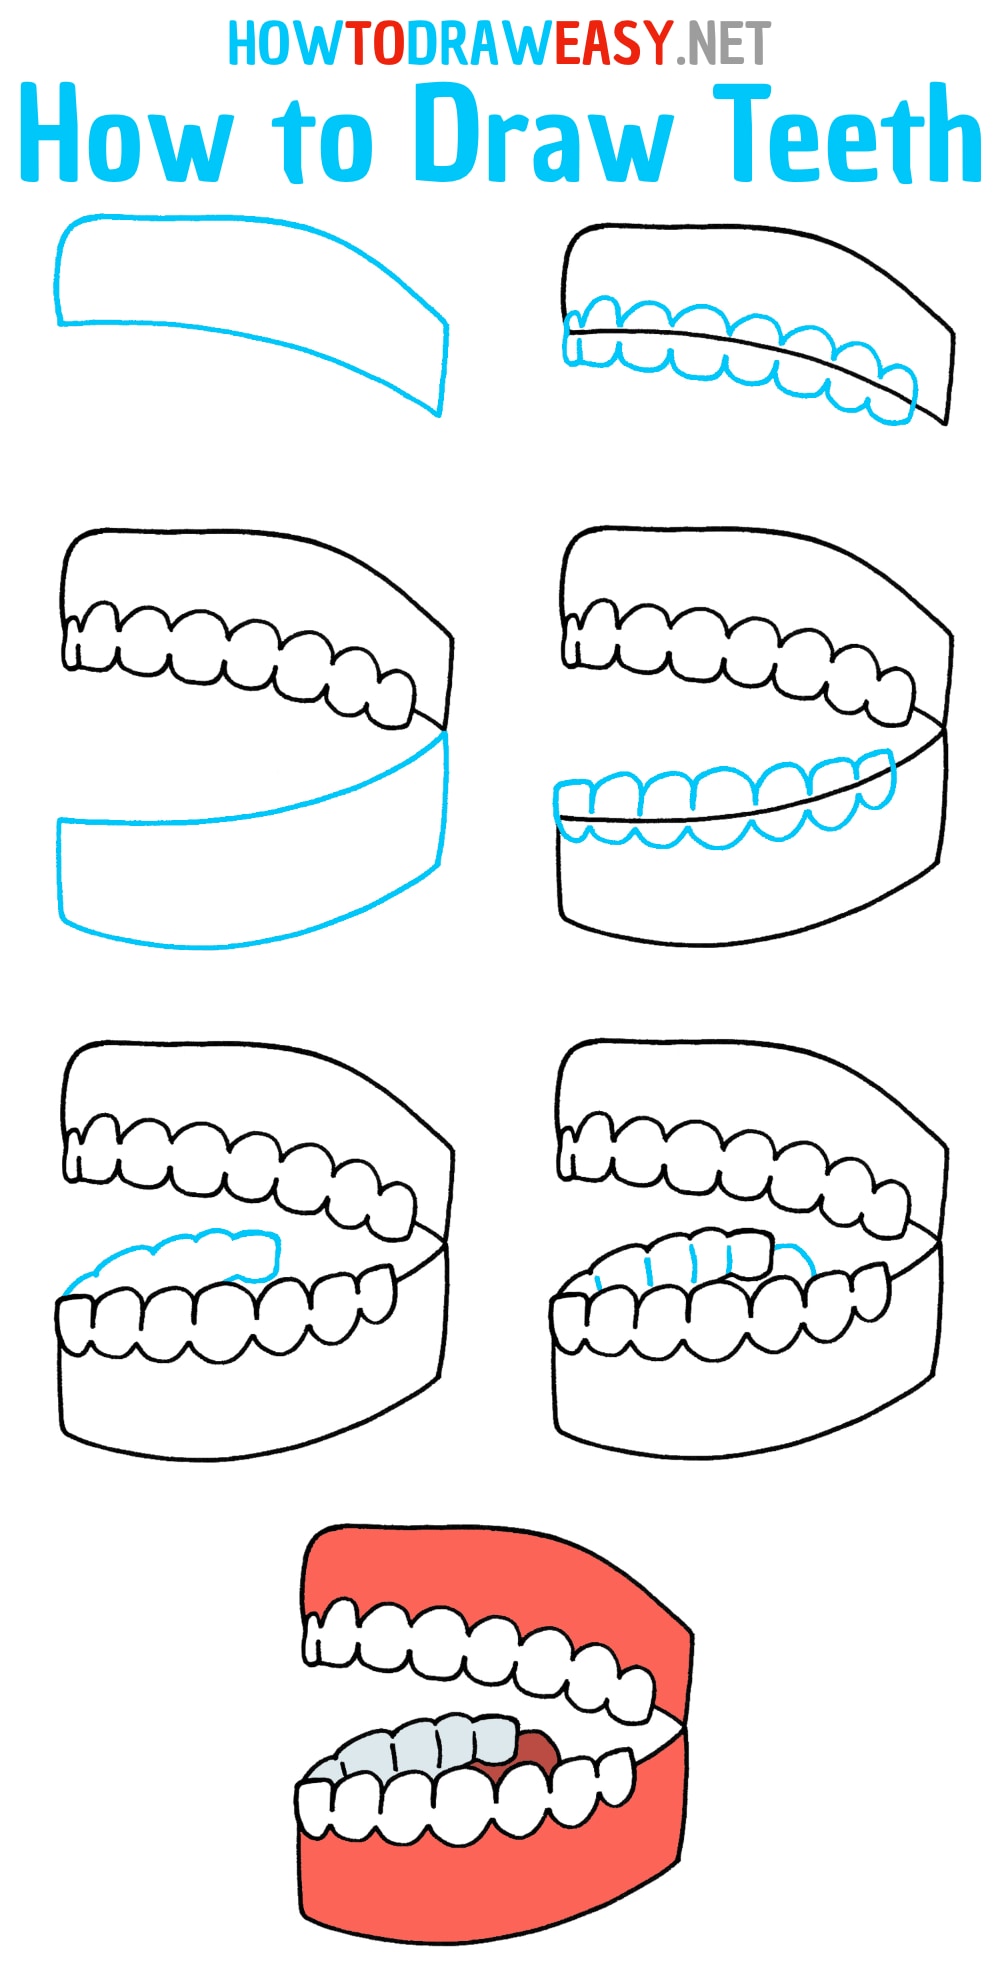 How to Draw Teeth Step by Step